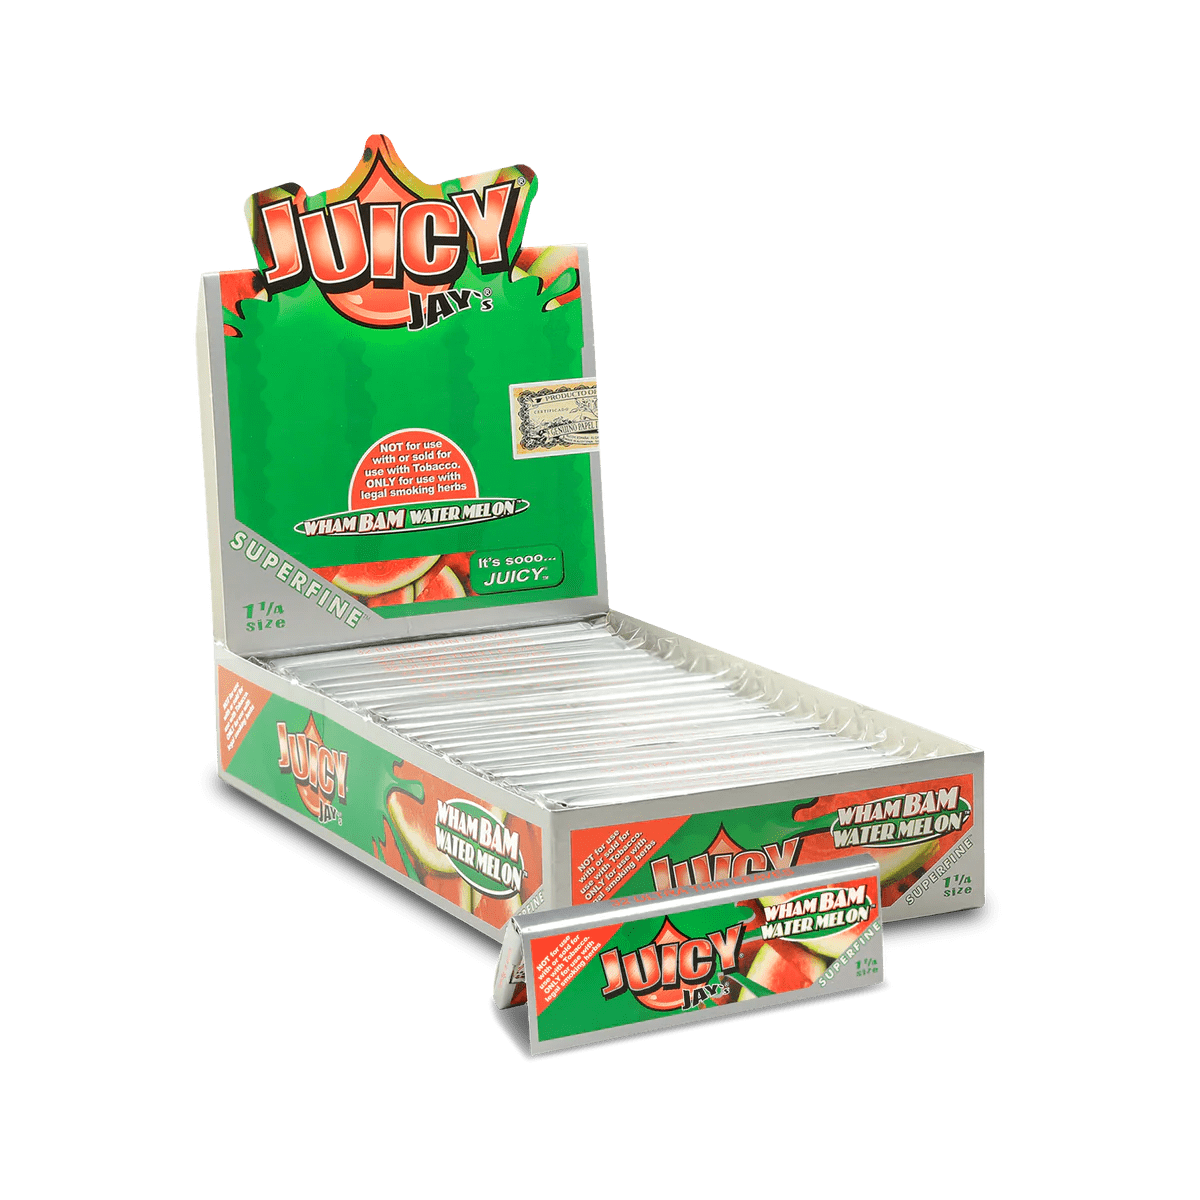 Juicy Jay Rolling Paper Watermelon / Box of 24 Super Fine Rolling Papers